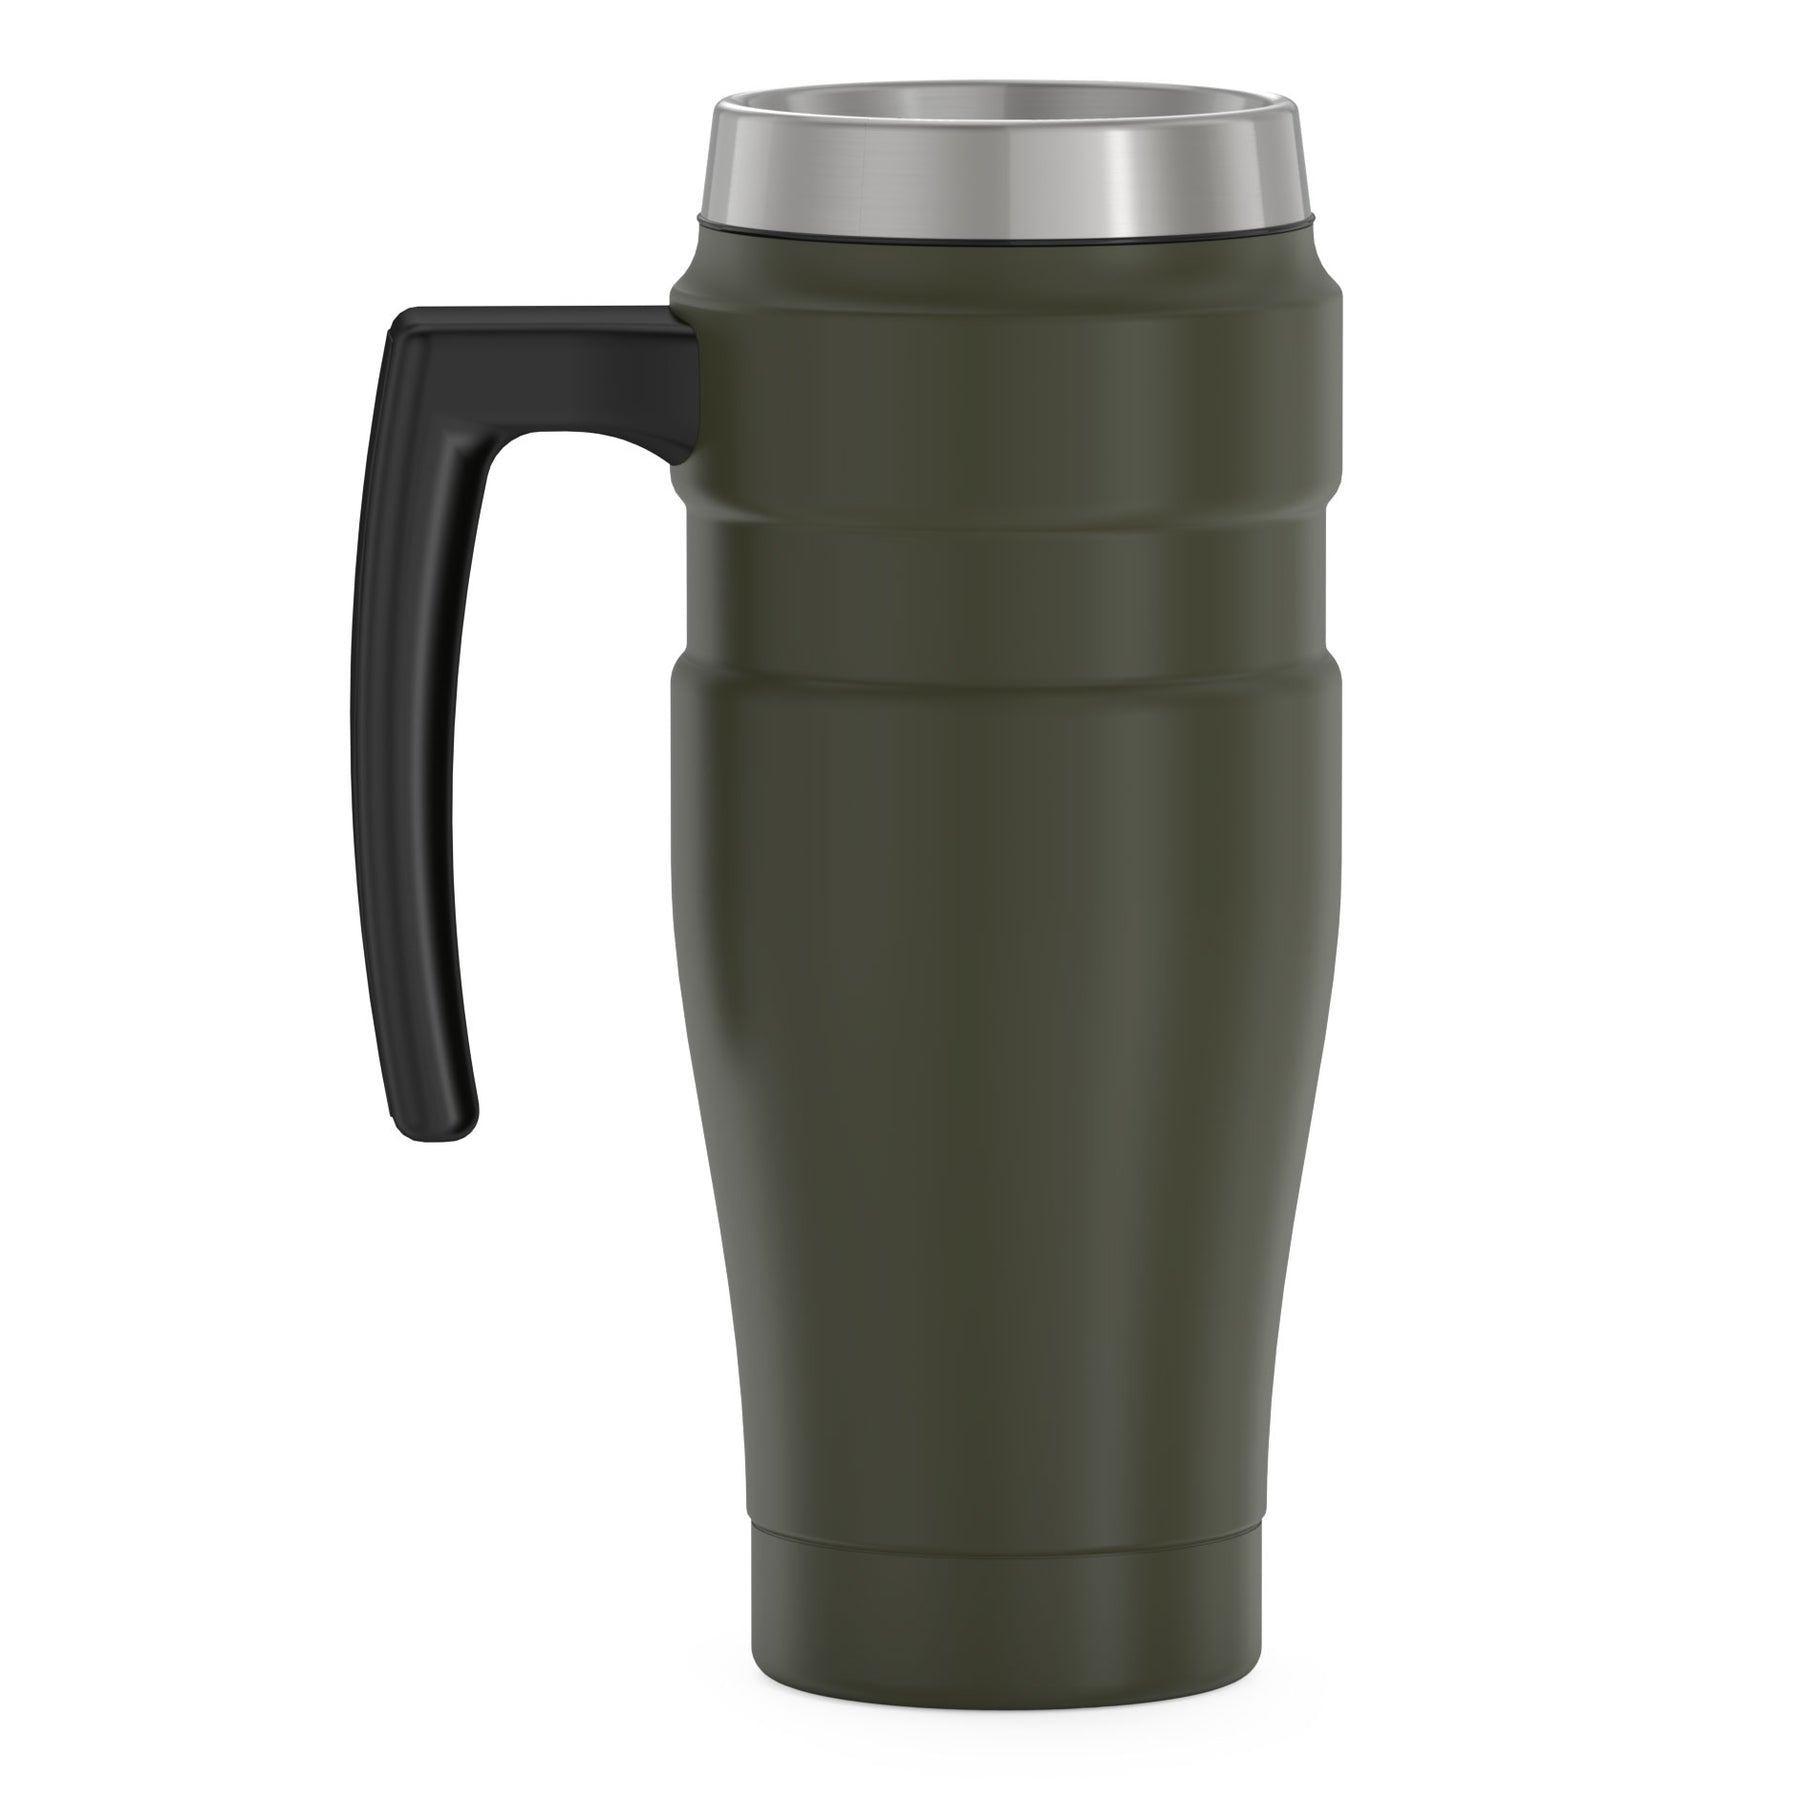 Thermos 16 oz. ThermoCafe Insulated Stainless Steel Travel Tumbler